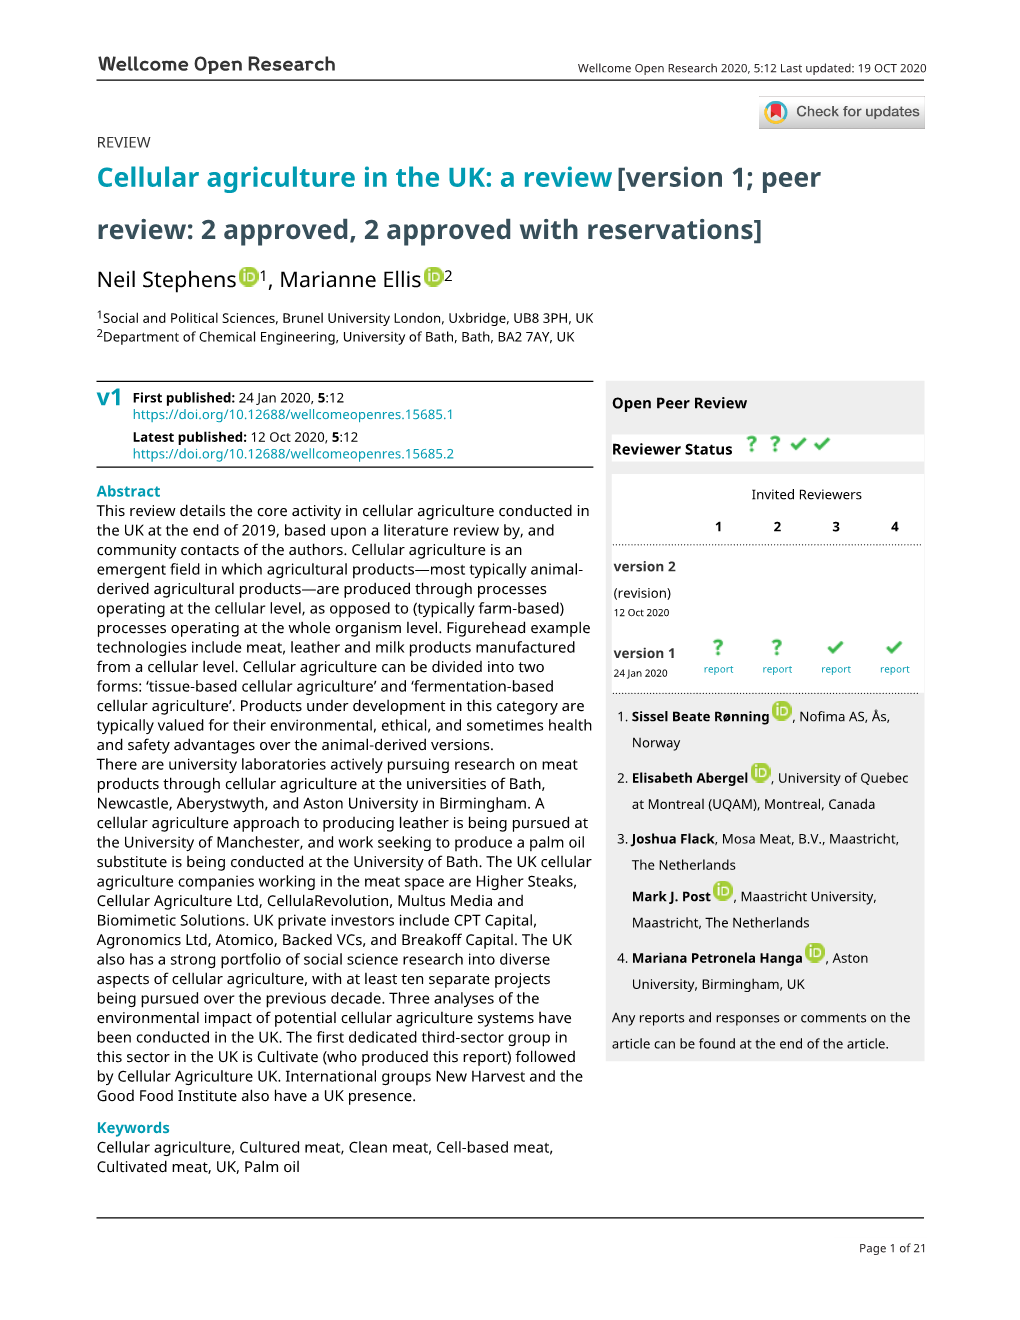 Cellular Agriculture in the UK: a Review [Version 1; Peer Review: 2 Approved, 2 Approved with Reservations]